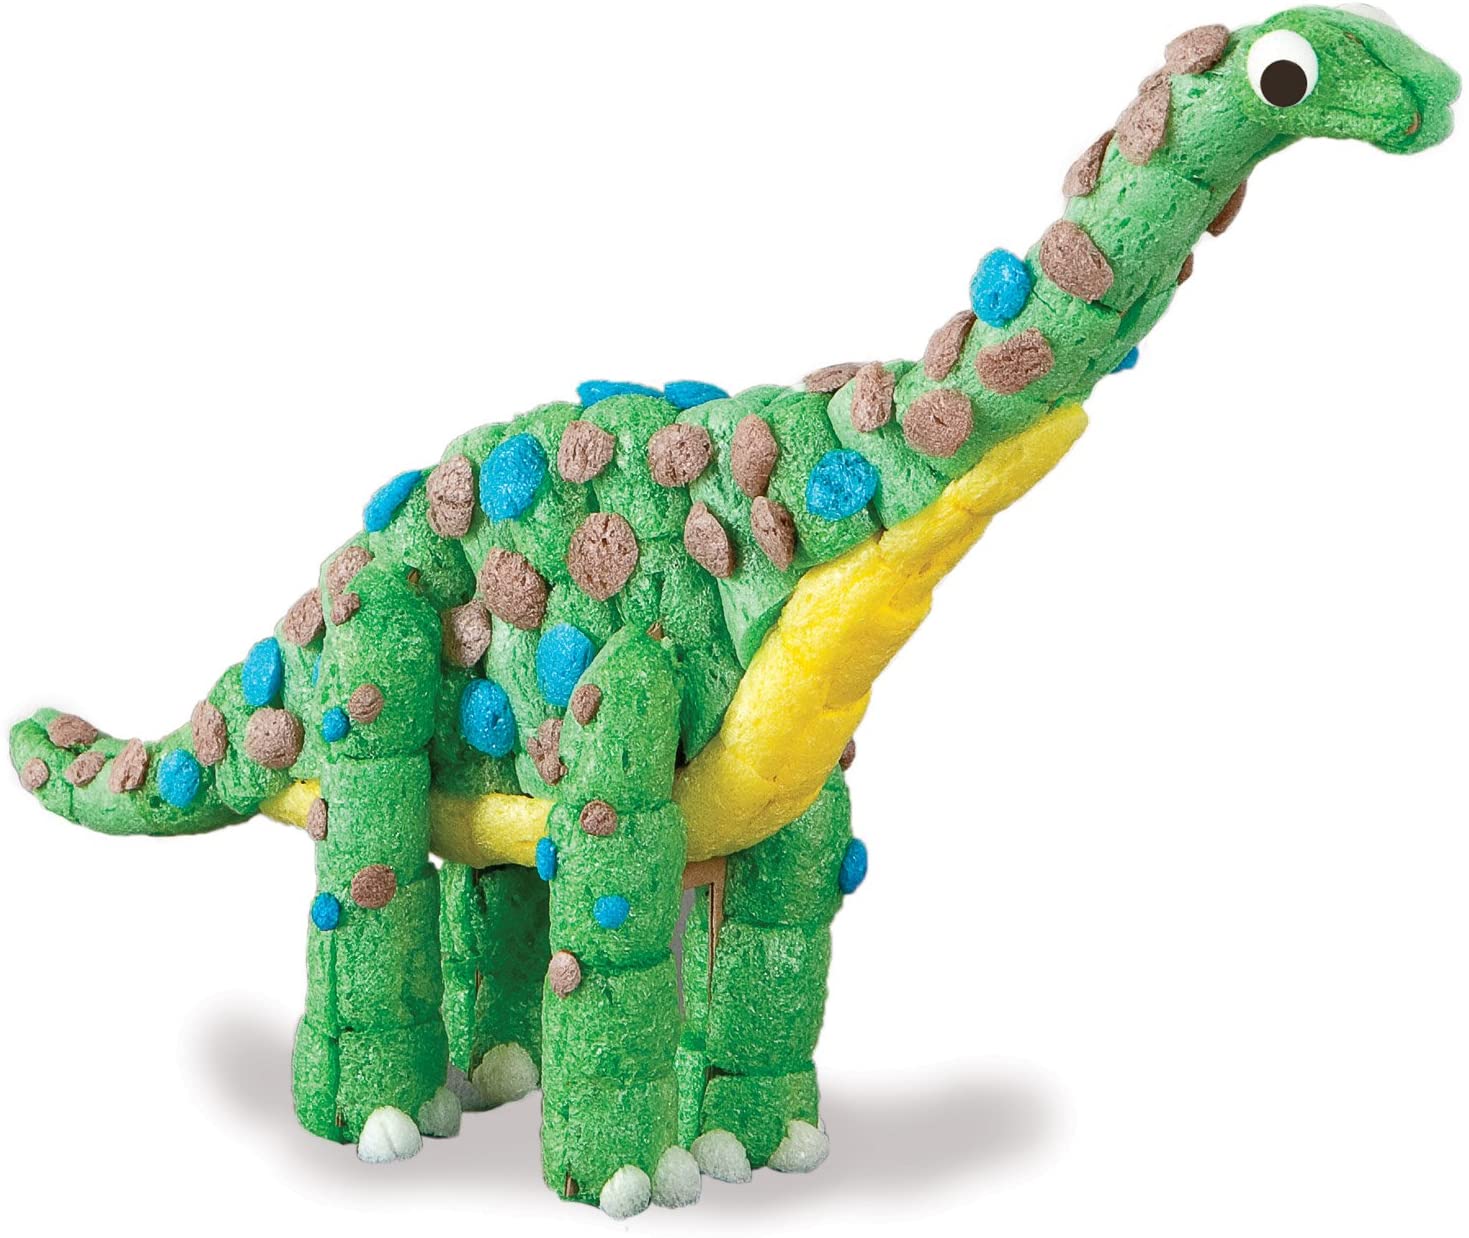 PLAYMAIS Classic Dinosaurs - ANB Baby -activity toy